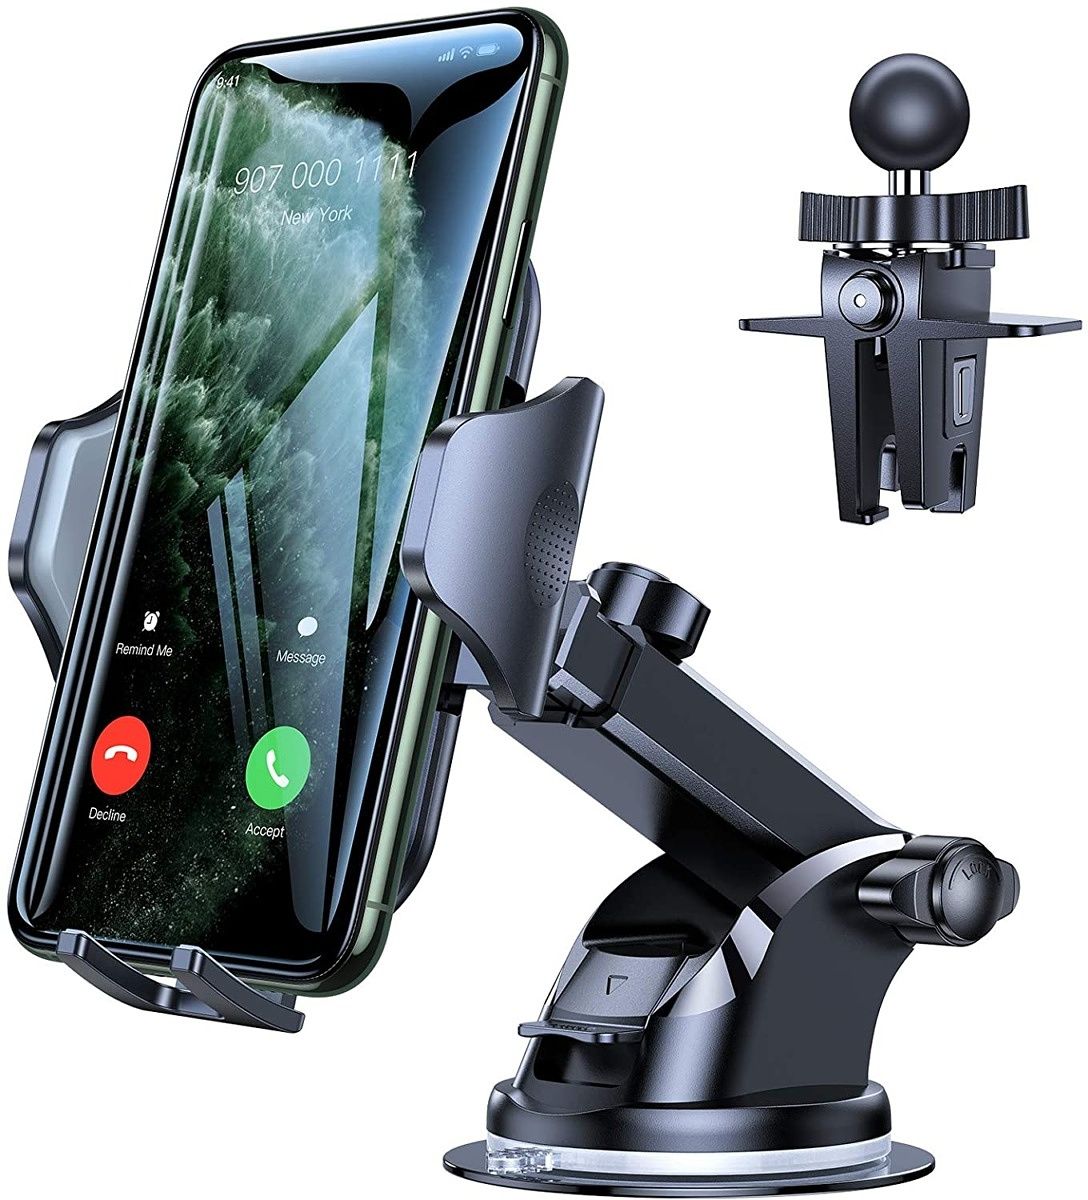 The Vicseed car mount, as you can see, is a suction cup-based mount that can easily hold your smartphone in place while you're driving.  This phone holder is affordable and suitable for holding the regular Pixel 7 and Pixel 7 Pro without any issues.